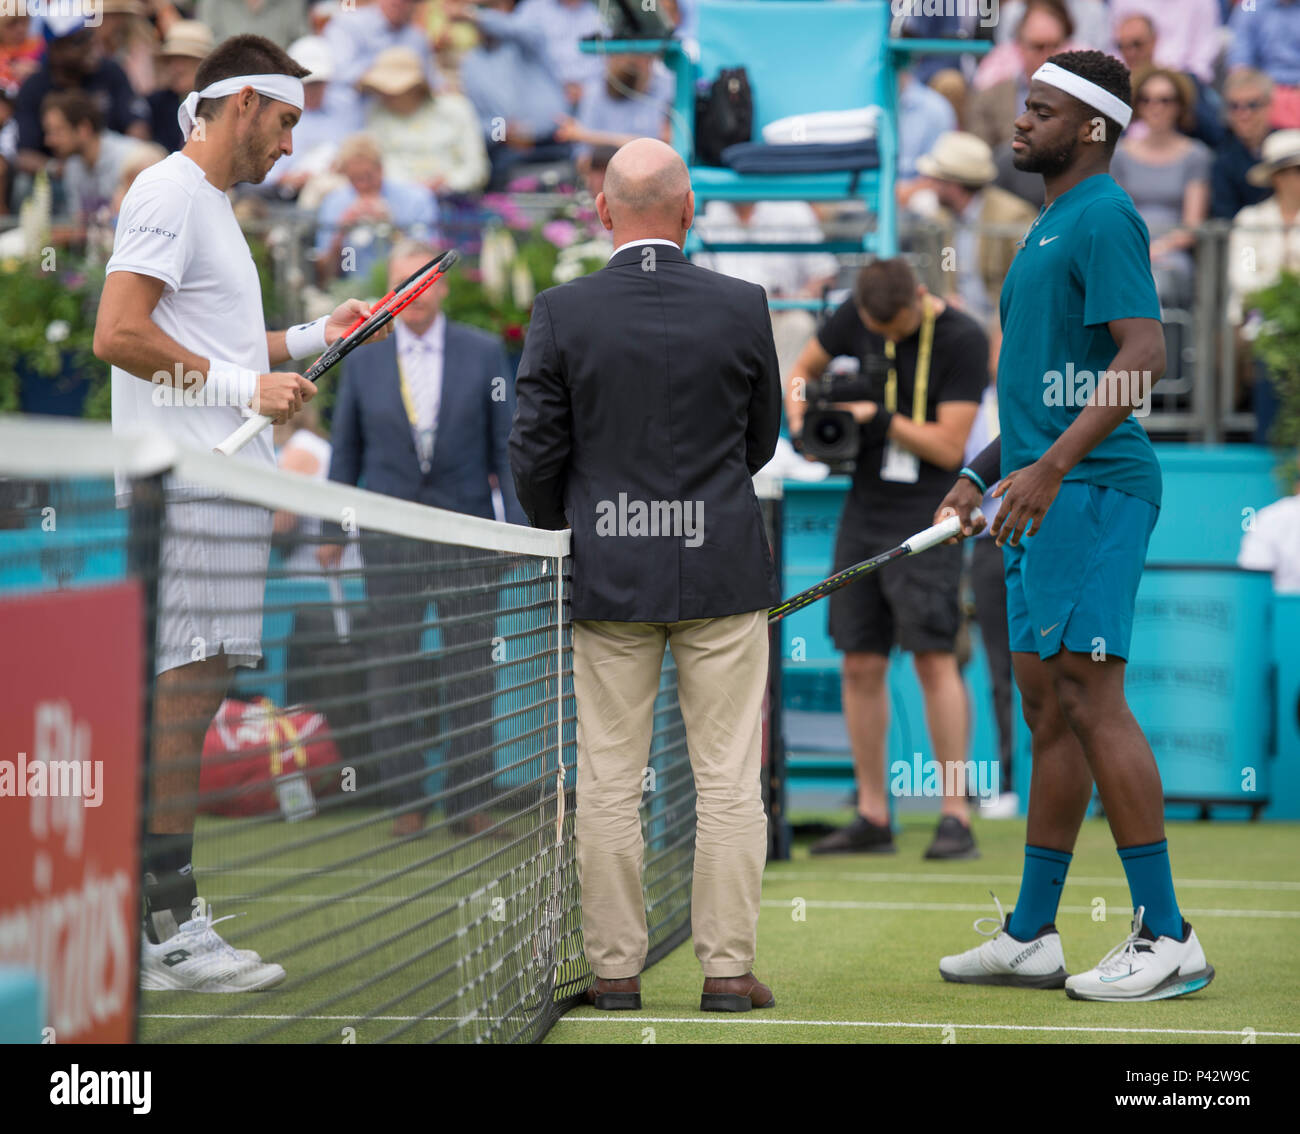 The Queen’s Club, London, UK. 20 June, 2018. Day 3 on centre court with Frances Tiafoe (USA), right, vs Leonardo Mayer (ARG). Credit: Malcolm Park/Alamy Live News. Stock Photo